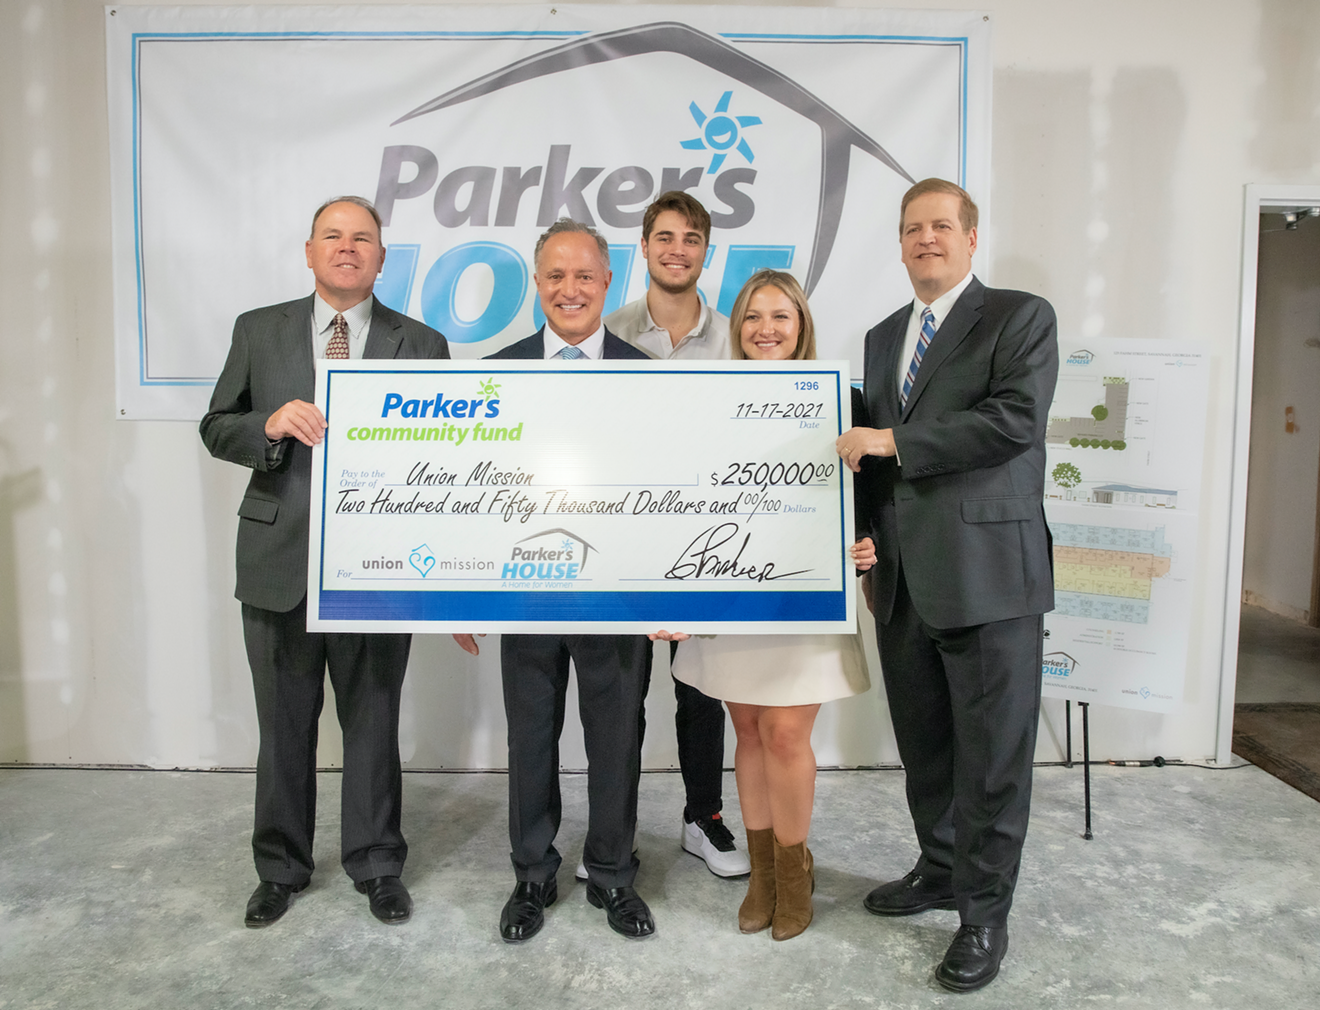 Parker's founder and CEO Greg Parker, Bennett Parker and Olivia Parker (second from left, center and second from right) presented a Parker's Community Fund check for $250,000 to Union Mission to create Parker's House, the only facility dedicated to unaccompanied women experiencing homelessness in coastal Georgia, on Nov. 17. Union Mission Board Chair Michael McCarthy, left, and Union Mission President and CEO Michael Traynor, right, accepted the donation on behalf of Union Mission. The facility, which is currently being renovated, will open in the first quarter of 2022 and will feature emergency housing for 32 women plus comprehensive on-site support services in Savannah.